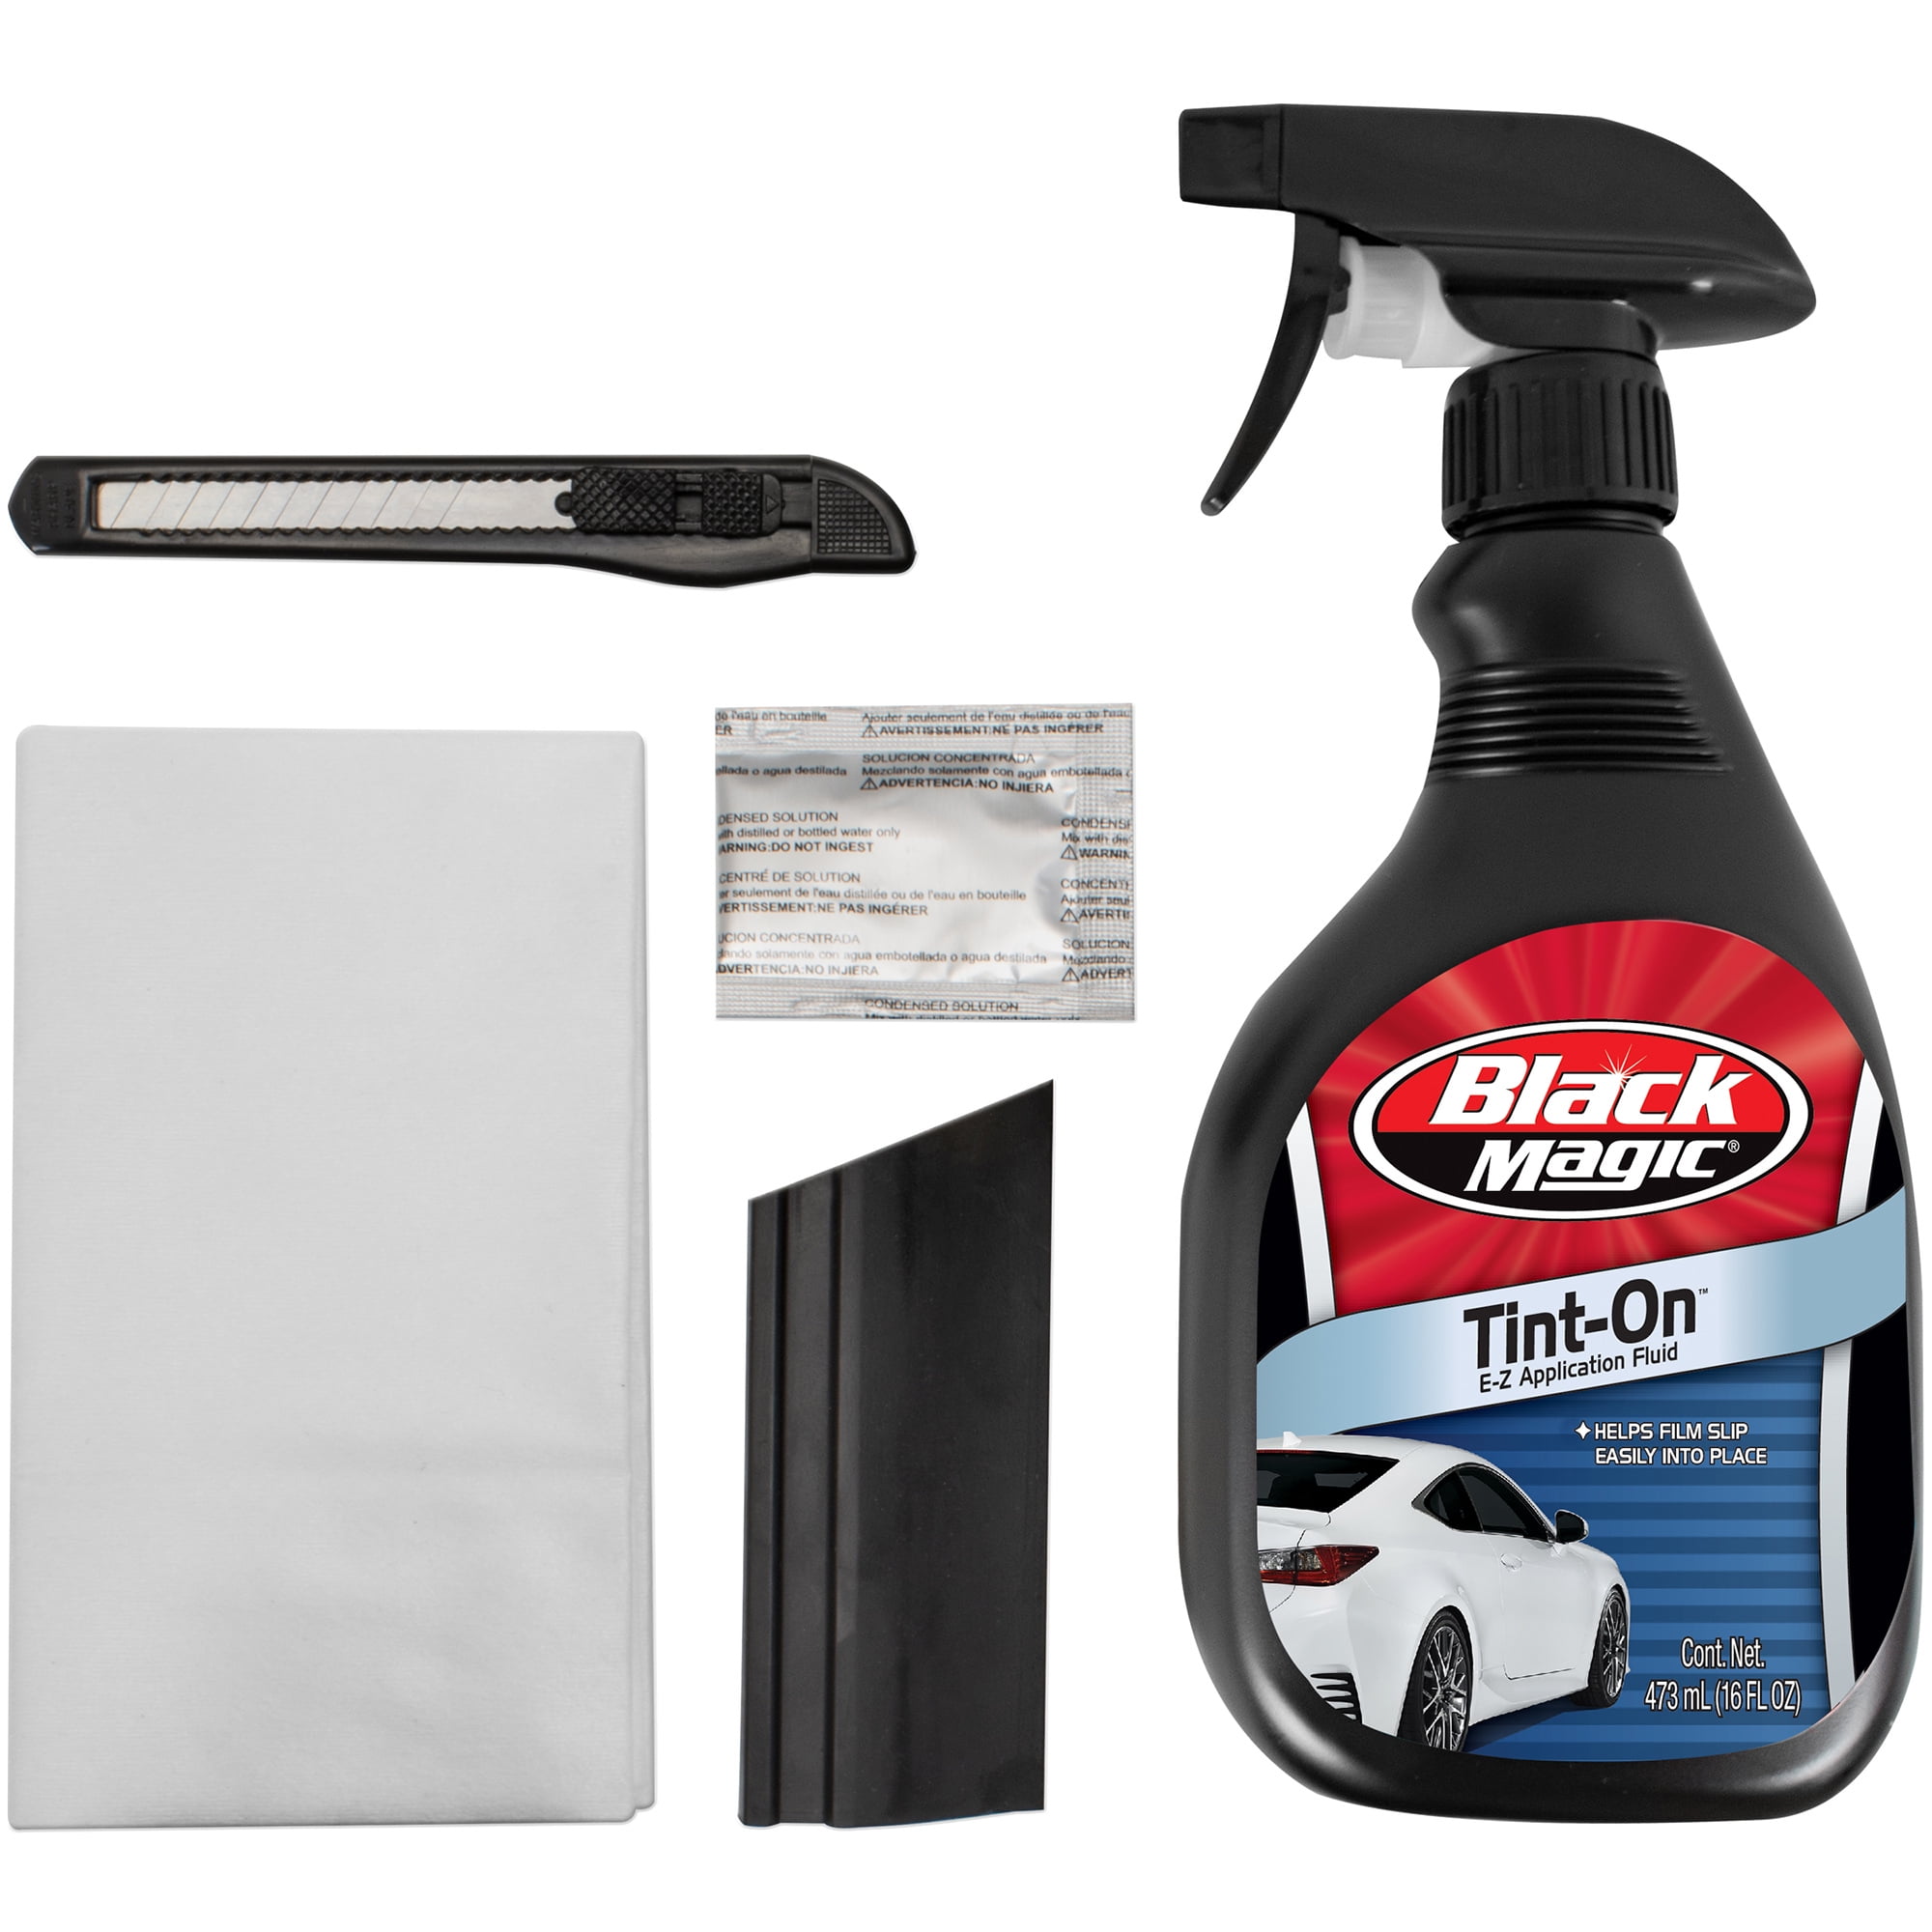 Pre-Cut Auto Window Tinting Kit for your 4 door car —